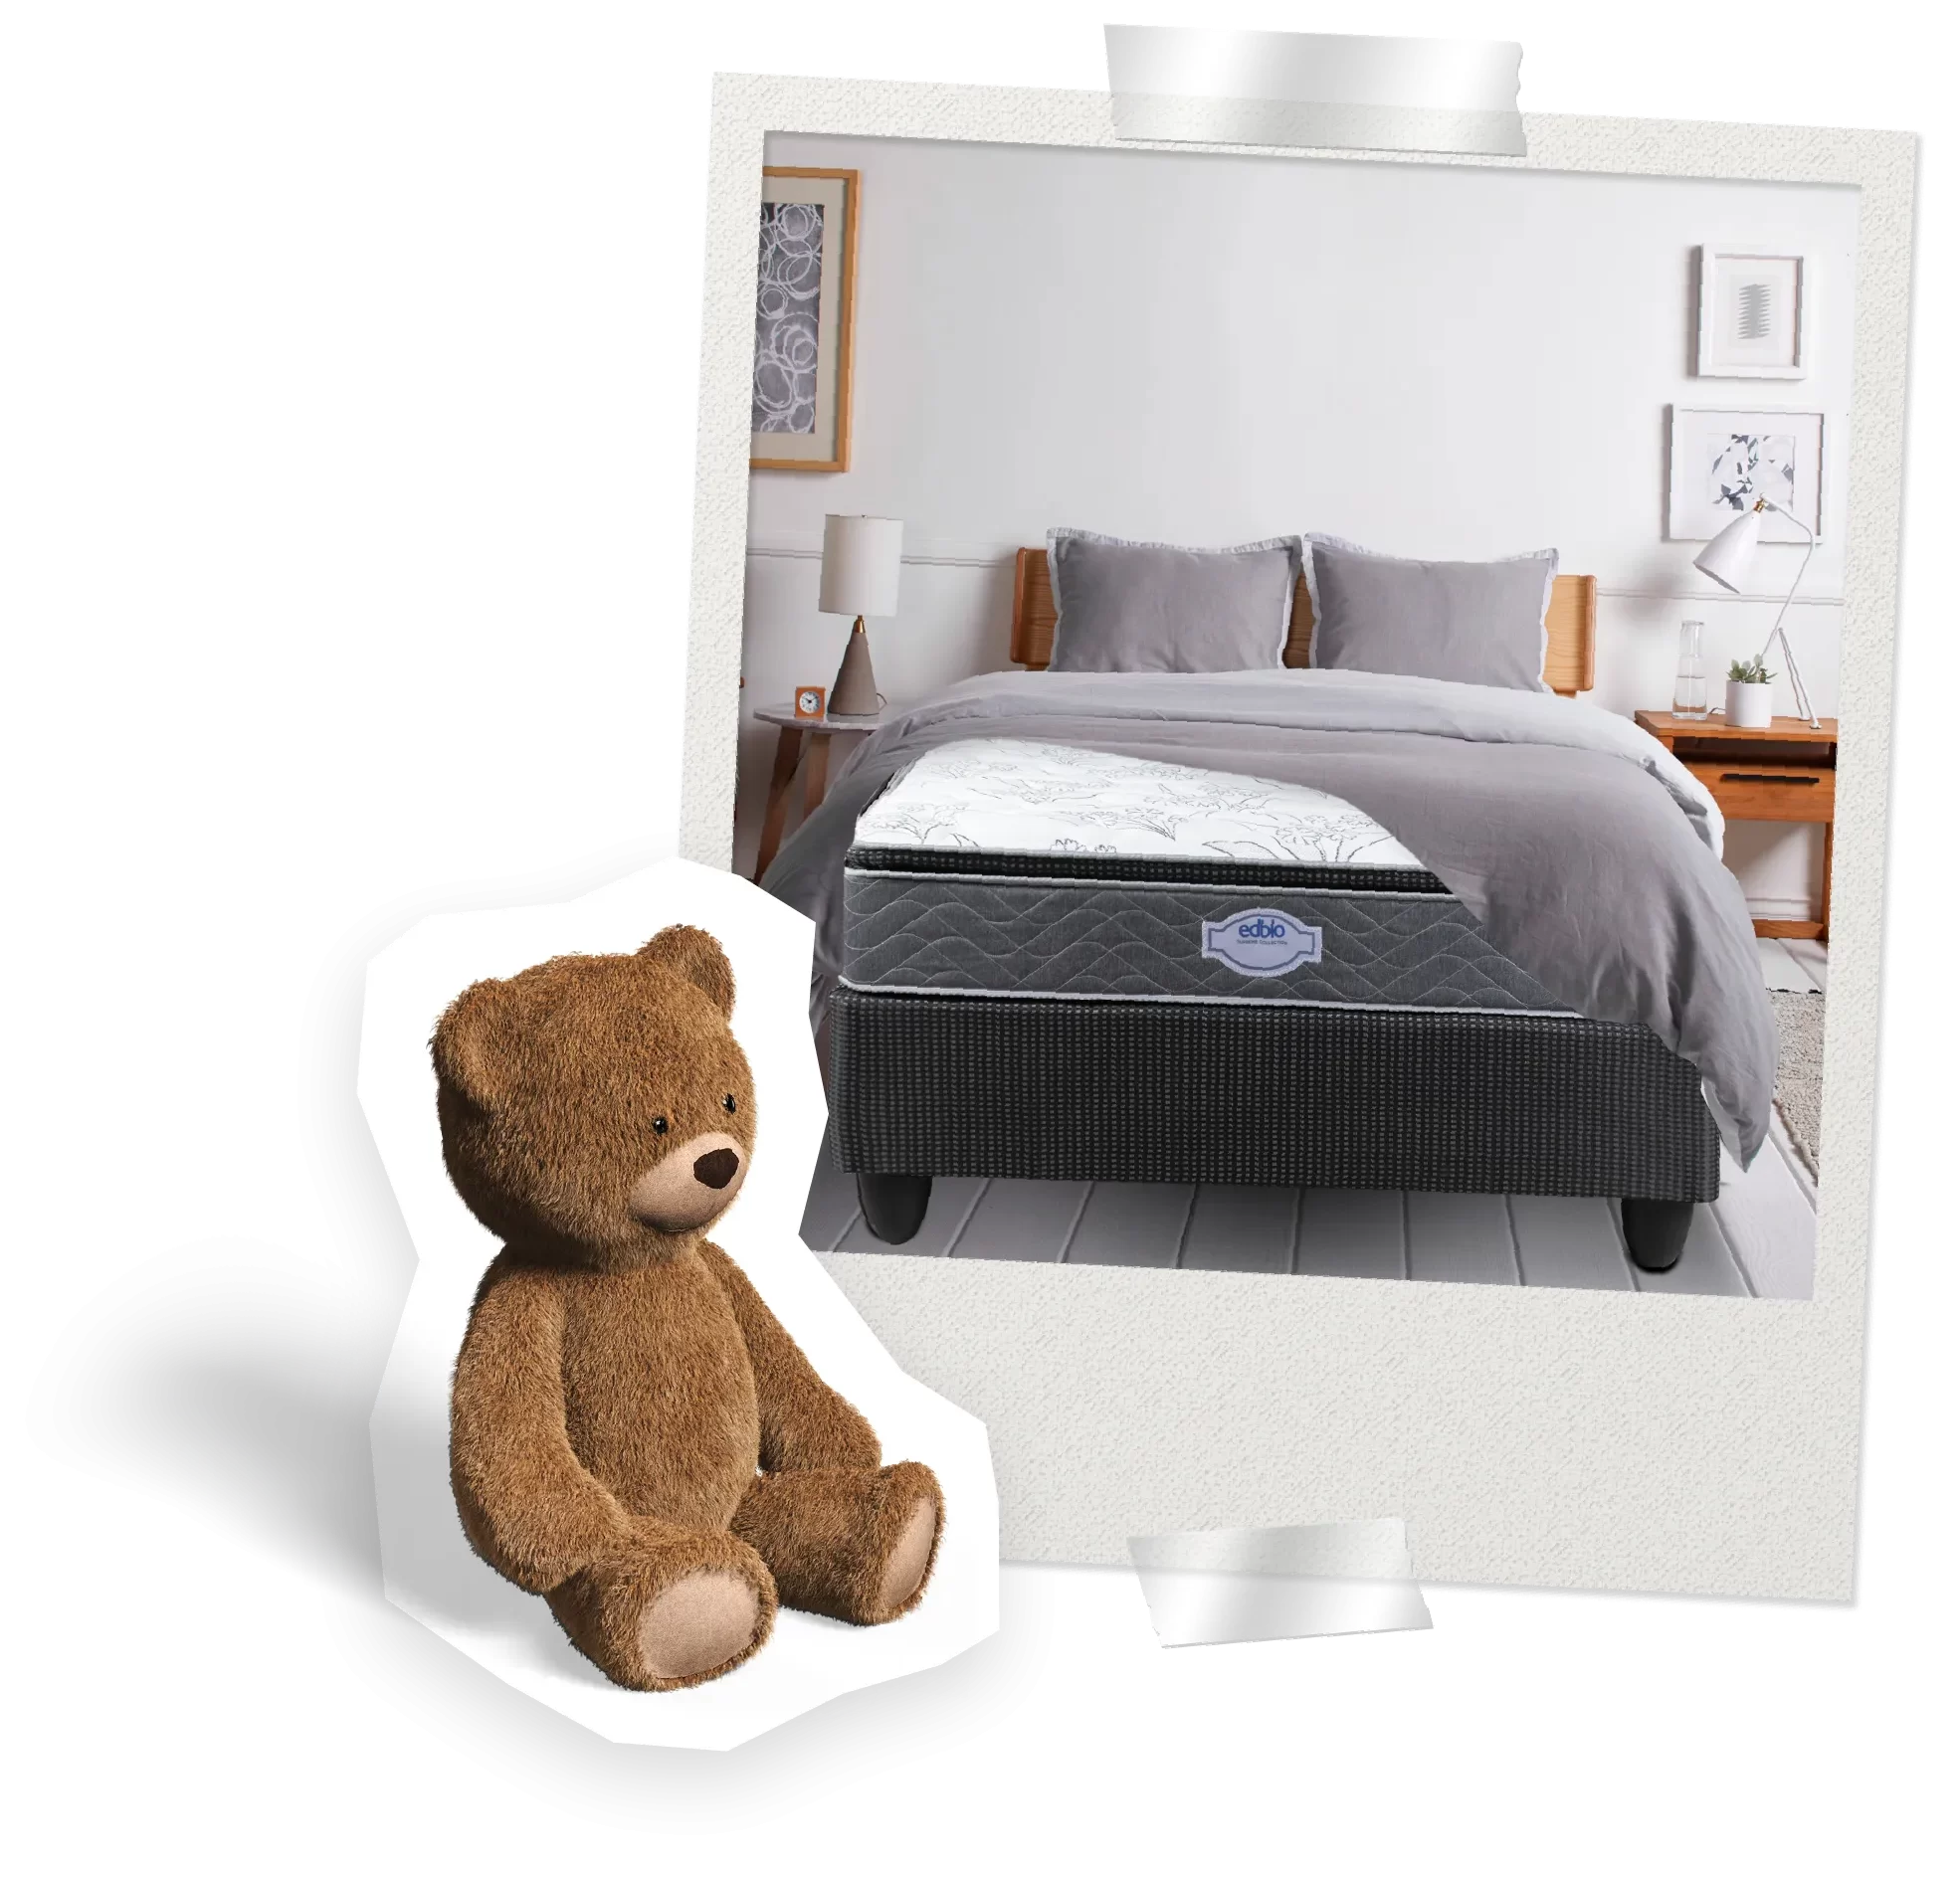 Bed Image with Bear